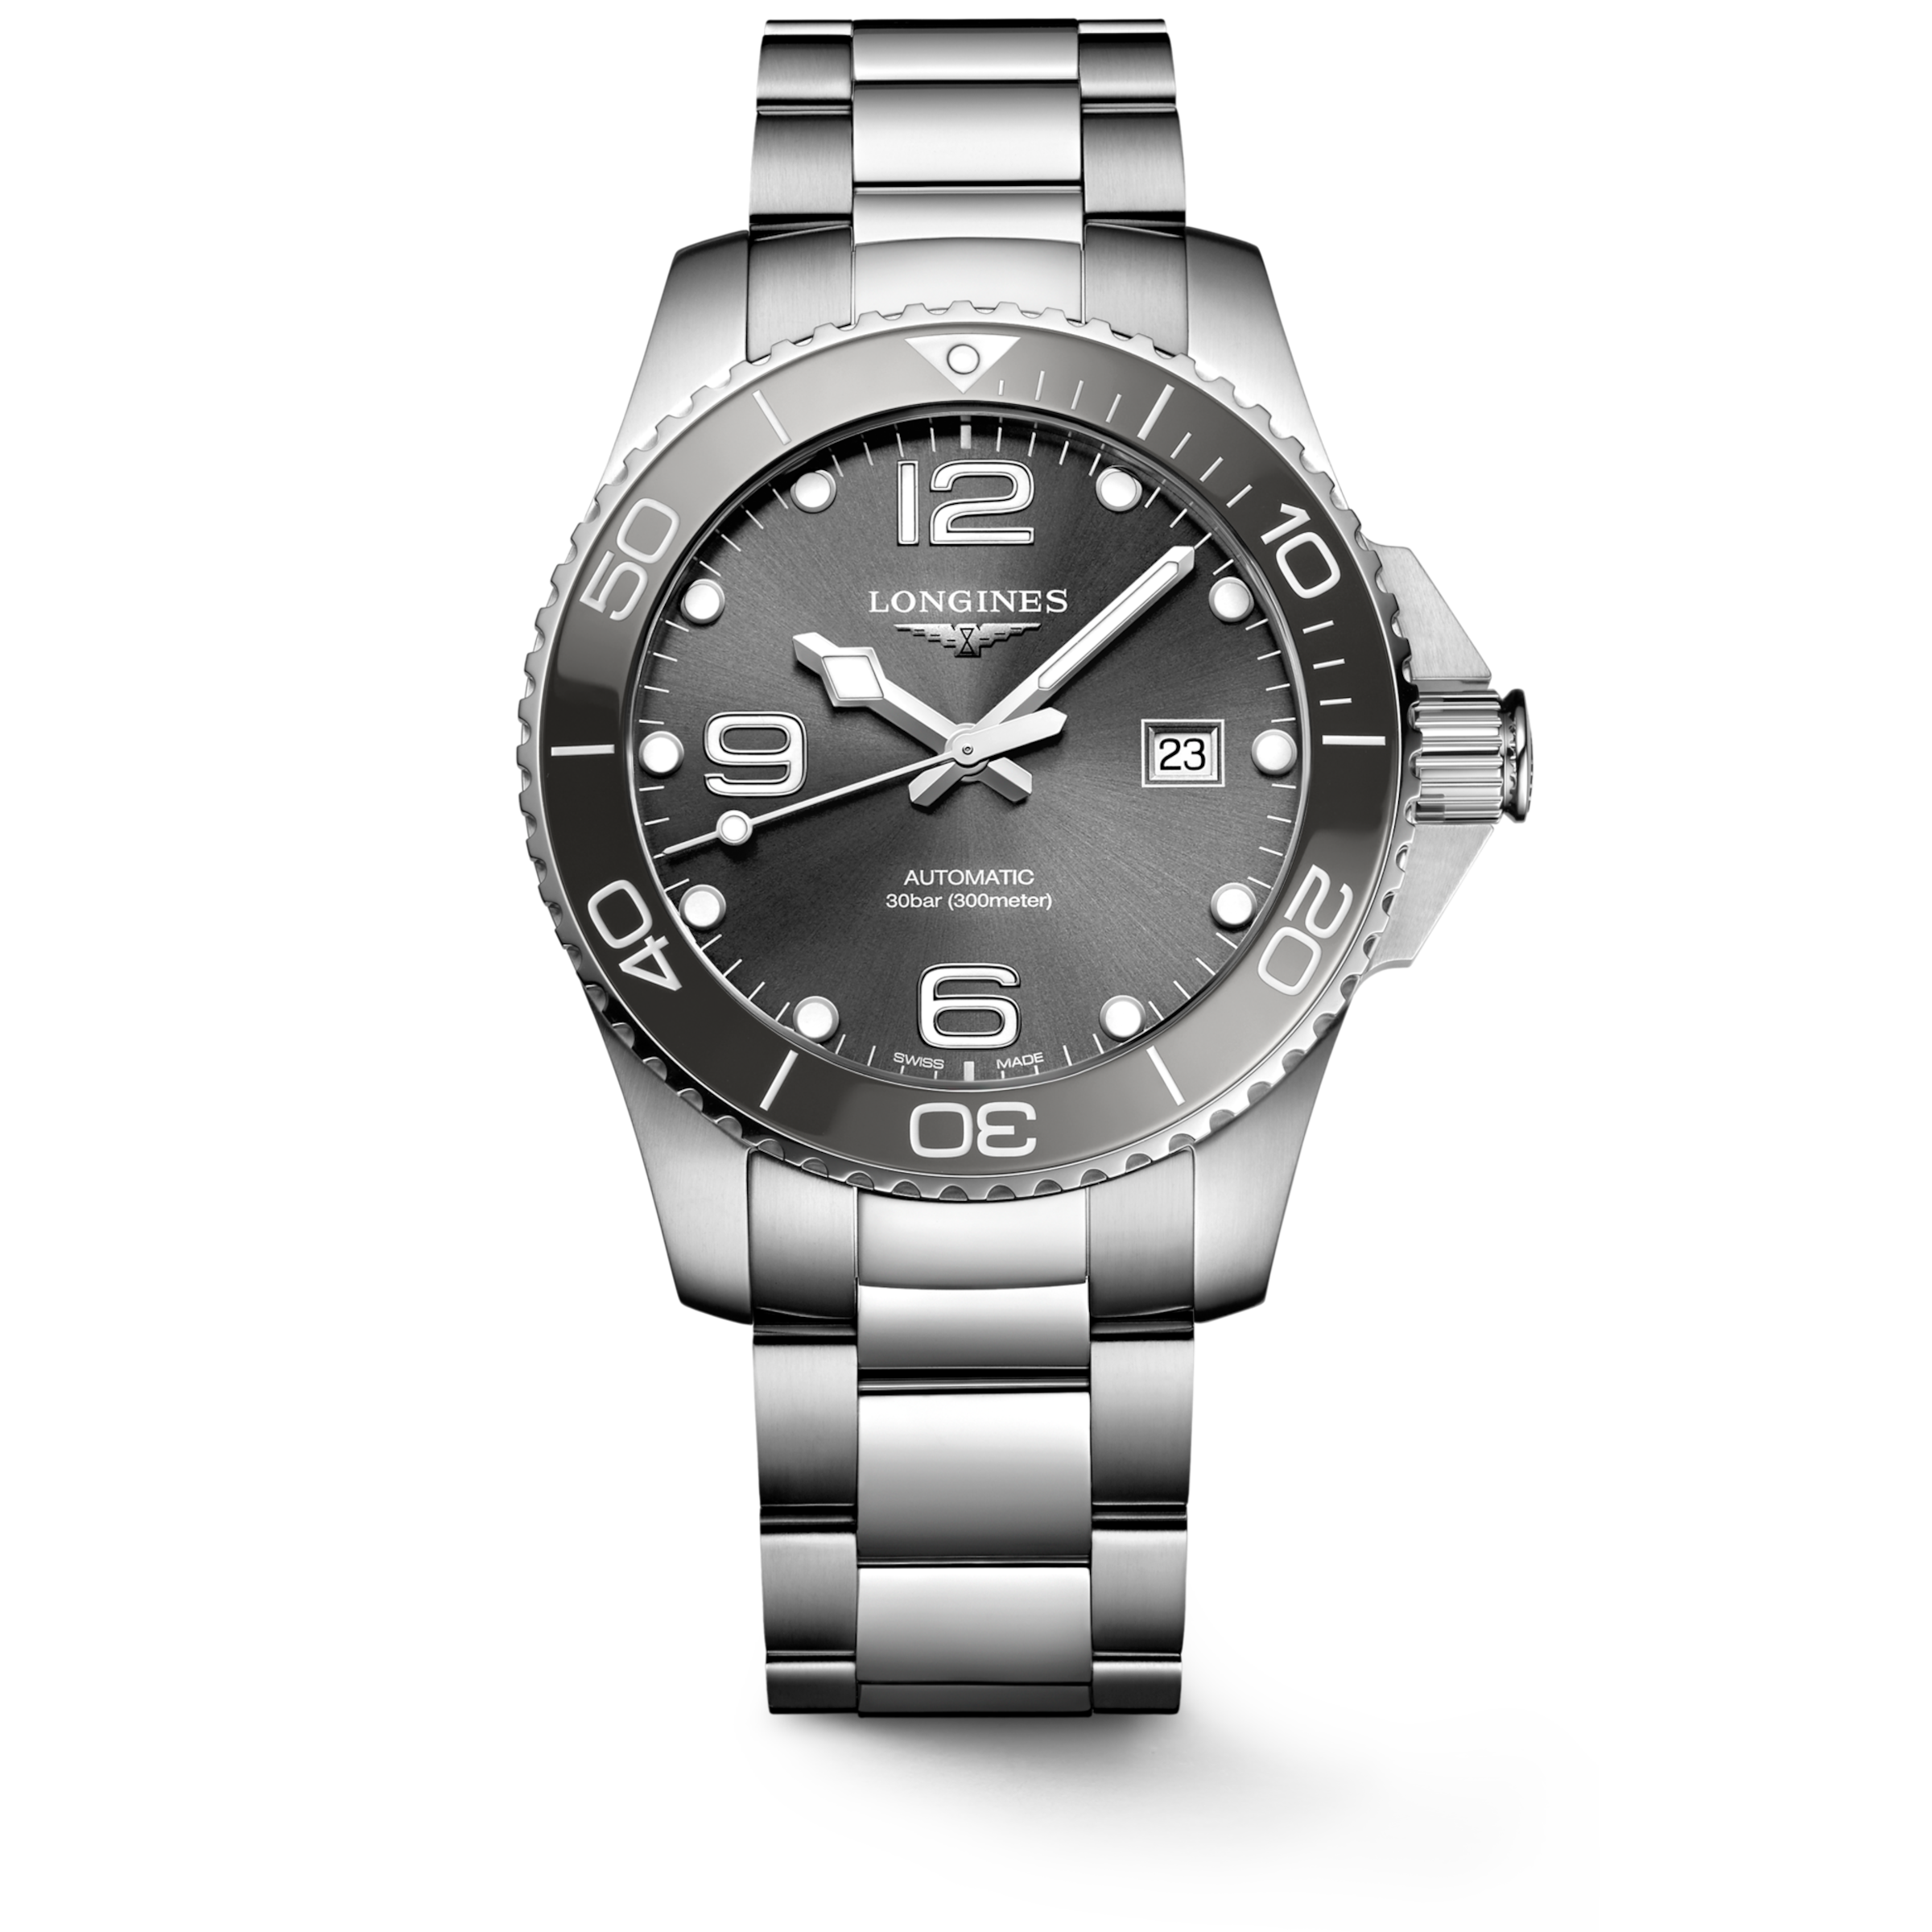 Longines HYDROCONQUEST Automatic Stainless steel and ceramic bezel Watch - L3.782.4.76.6